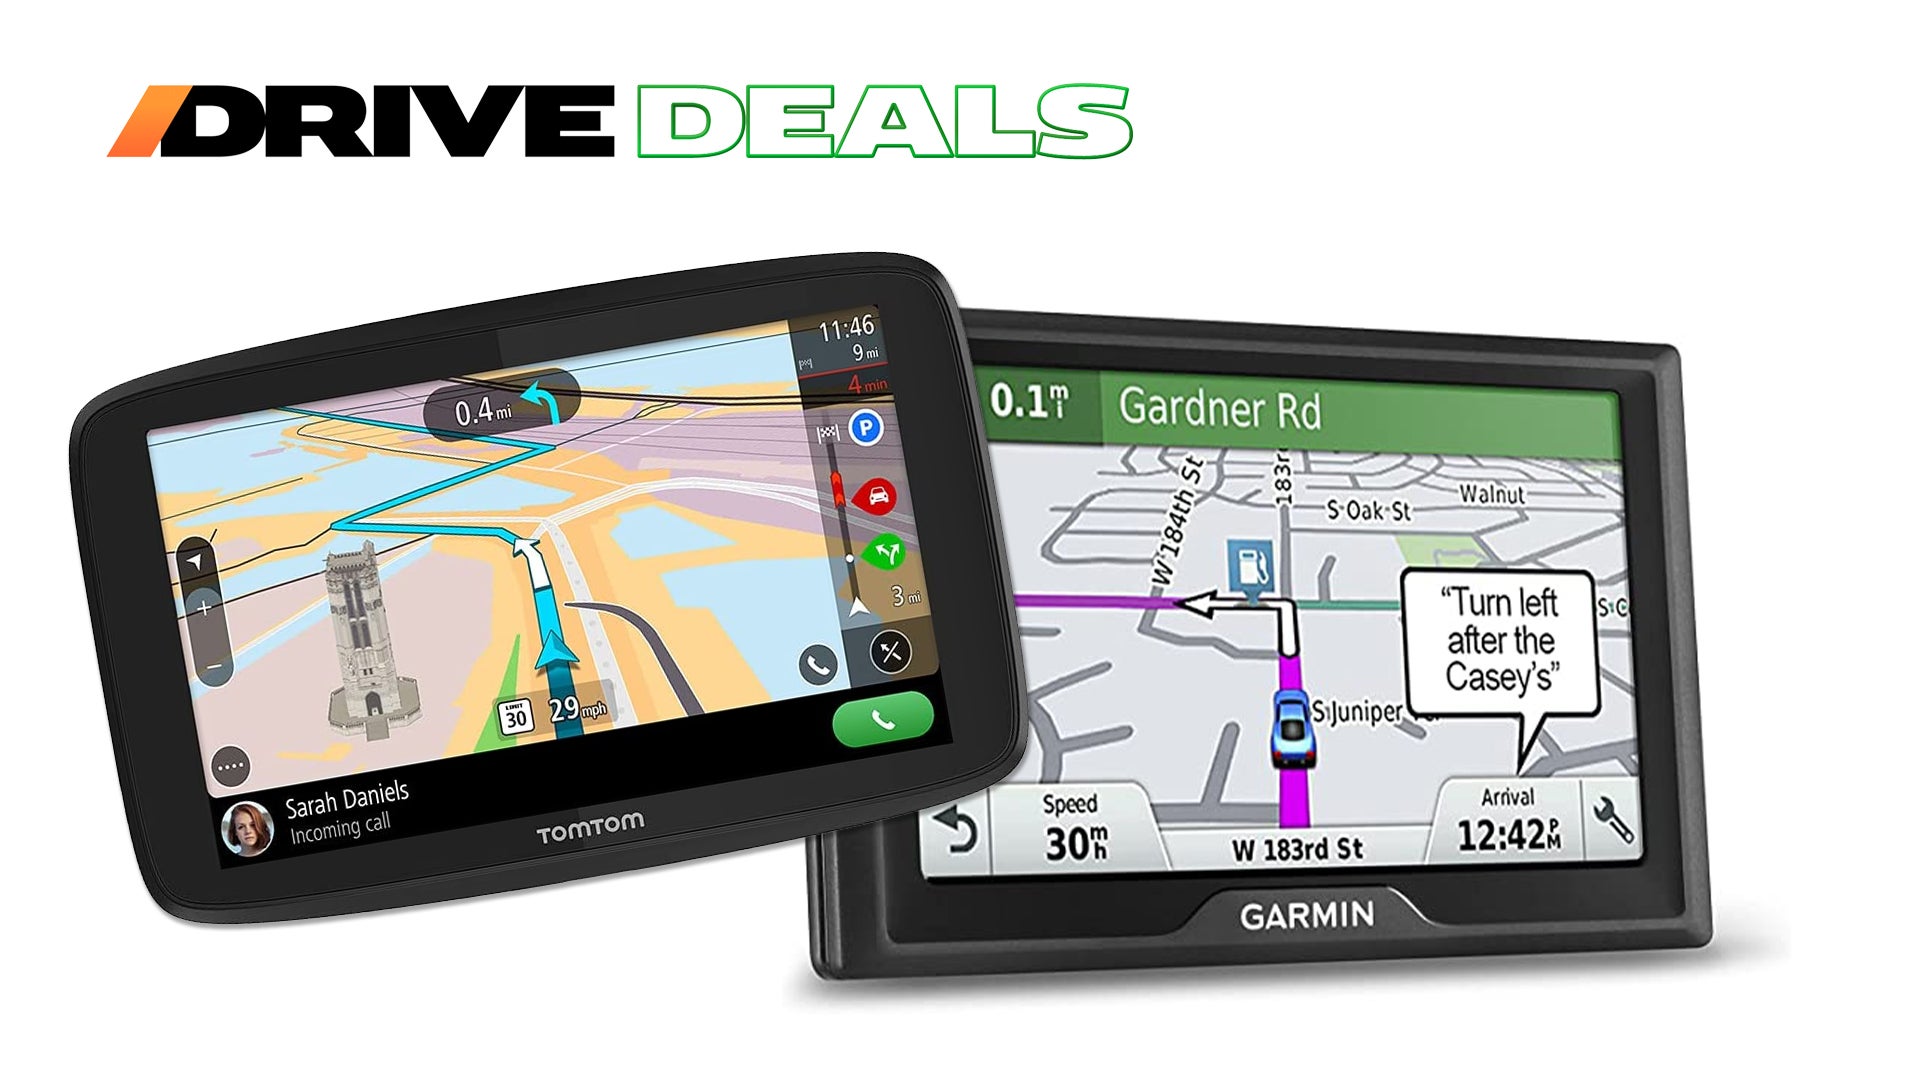 Get Your Old Car a New Unlost With These Smoking GPS Deals